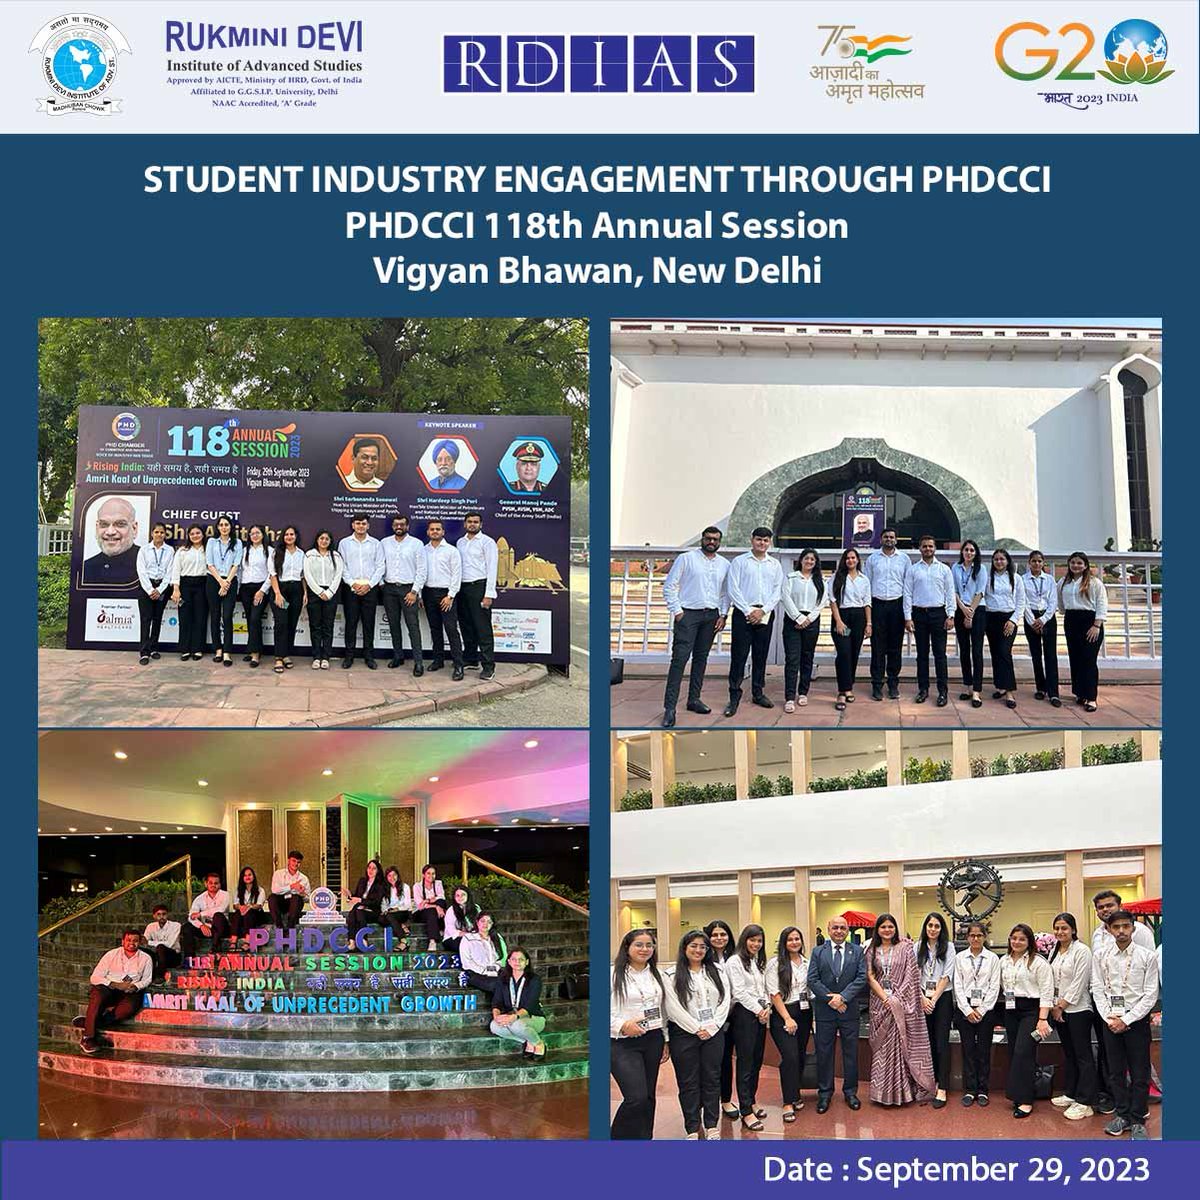 Students of MBA, Rukmini Devi Institute of Studies, participated in the 118th Annual Session, organized by 𝐏𝐇𝐃𝐂𝐂𝐈 on September 29, 2023, at Vigyan Bhawan.
#RDIAS #MBA #BBA #PHDCCI #IndustryAcademia #student #skillgap #AzadiKaAmritMahotsav #75yearsofIndependence